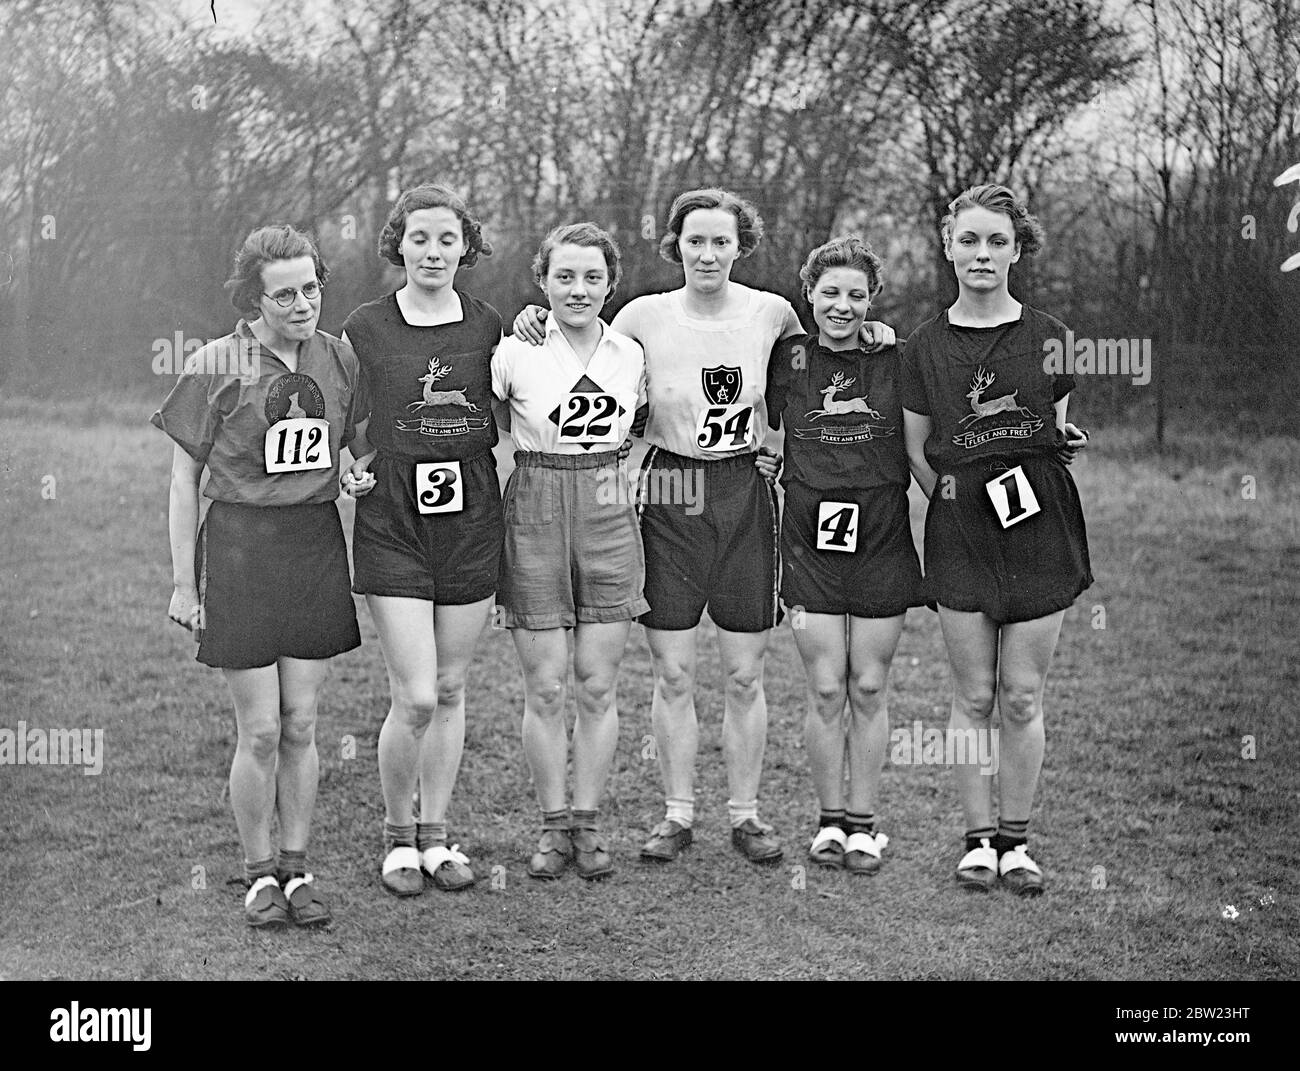 First six in women's national cross country to represent England in an International Event. Six girls who occupy the first six places in the 12th annual National Cross-Country Championship for women at Luton, Bedfordshire, will represent England in an international race against France and Belgium in Lille on 12 March. Photo shows, the six girls after the cross-country, left to right M Armstrong (West Bromwich Harriers), second, D Harris (Birchfield Harriers), sixth, Evelyn Foster (Civil Service), the winner ,Lily Styles (London Olympiads) third, M Clark (Birchfield Harriers), fourth, D Frankli Stock Photo